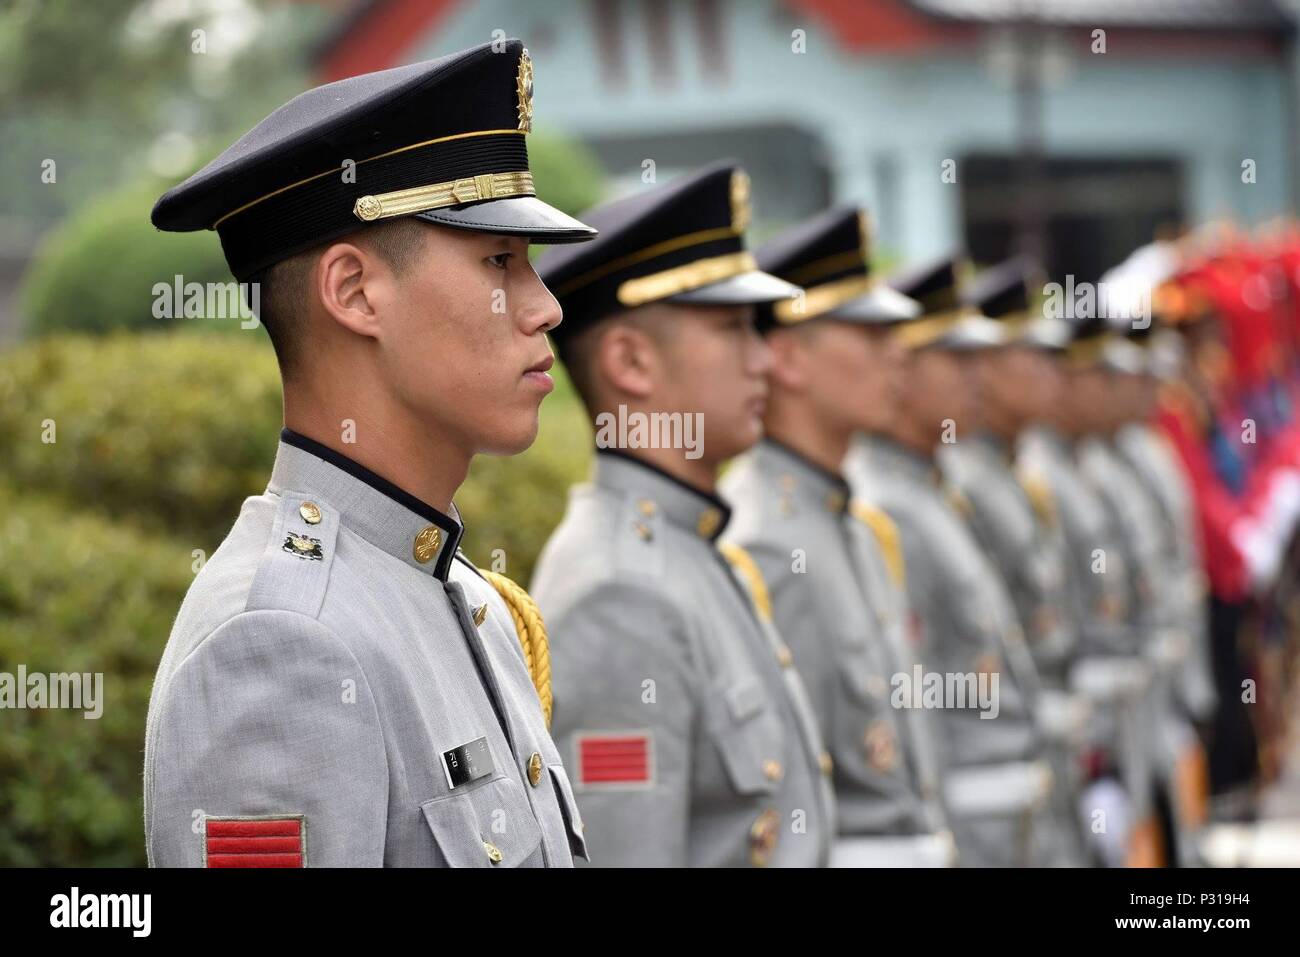 The Republic of Korea Army Honor Guard stands at attention as they wait ...